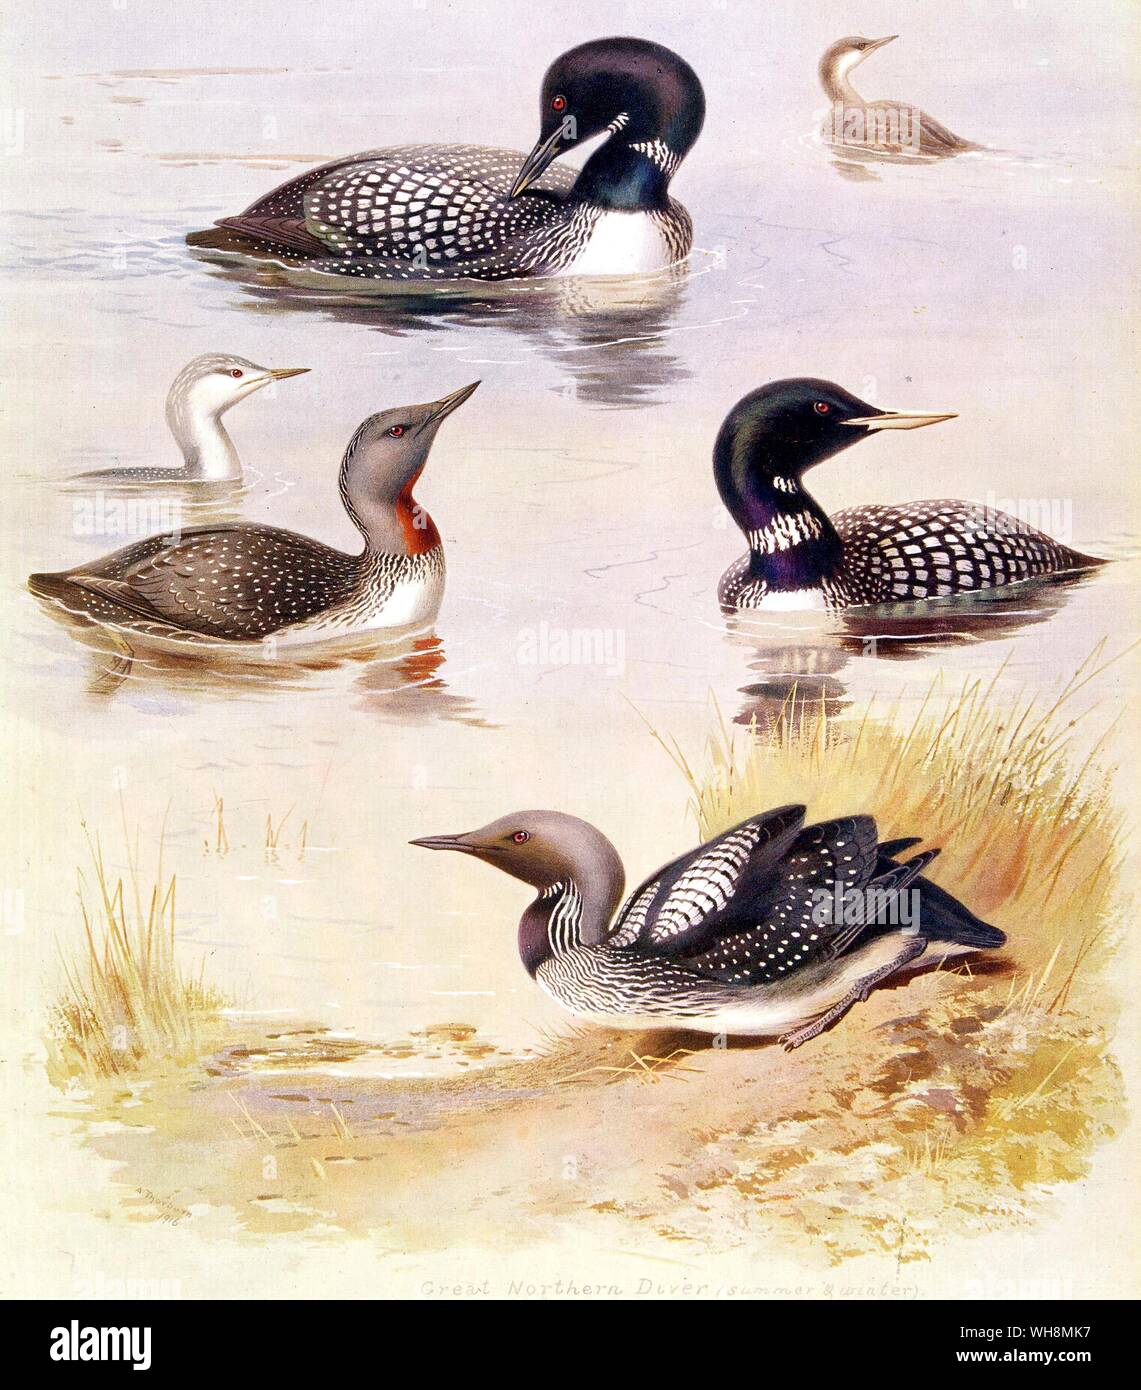 Great Northern Diver. Red Throated Diver. White Billed Diver. Black Throated Diver Stock Photo